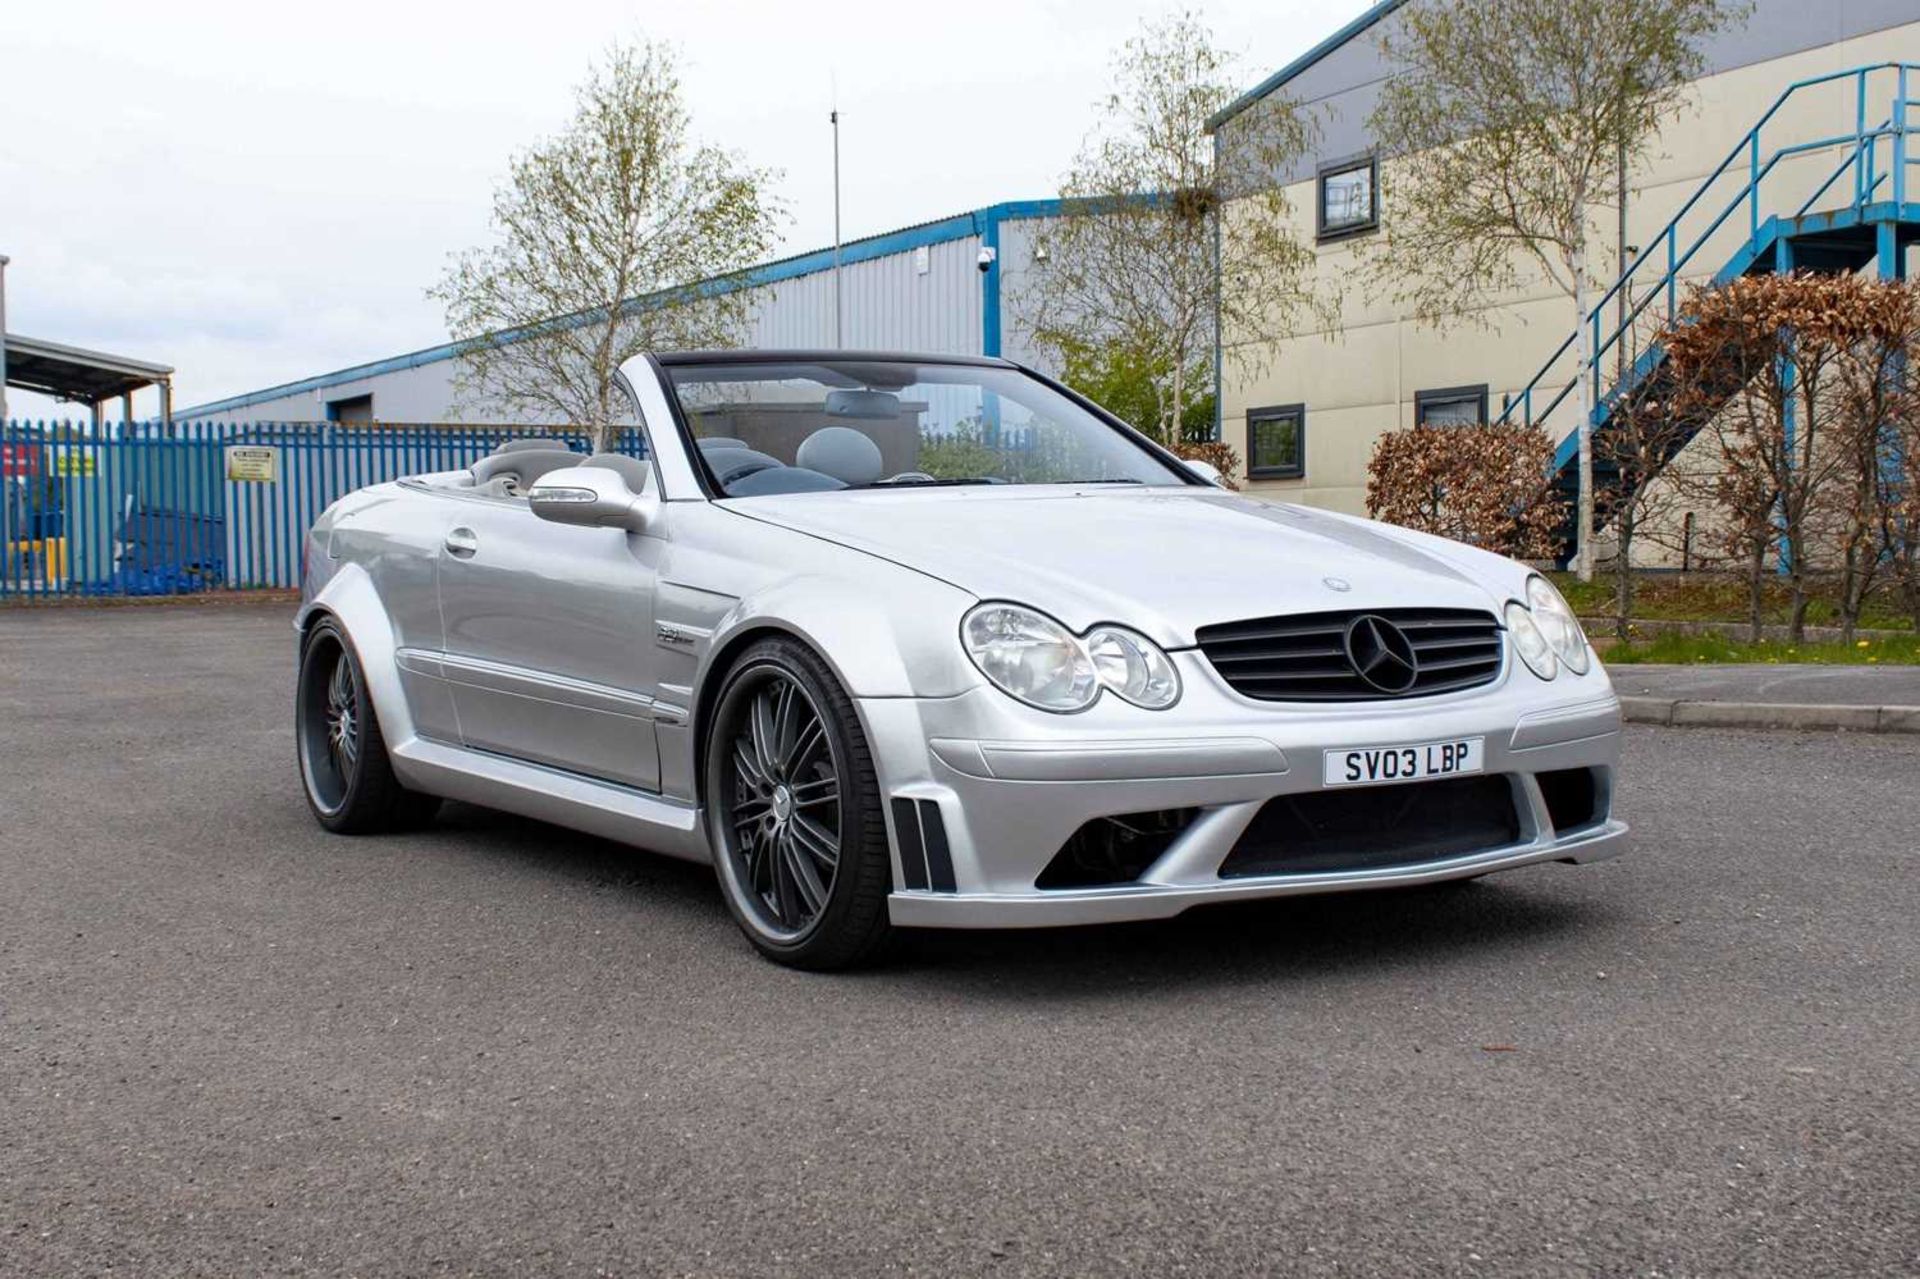 2003 Mercedes CLK240 Convertible ***NO RESERVE*** Fitted with AMG Black Series style body kit, inclu